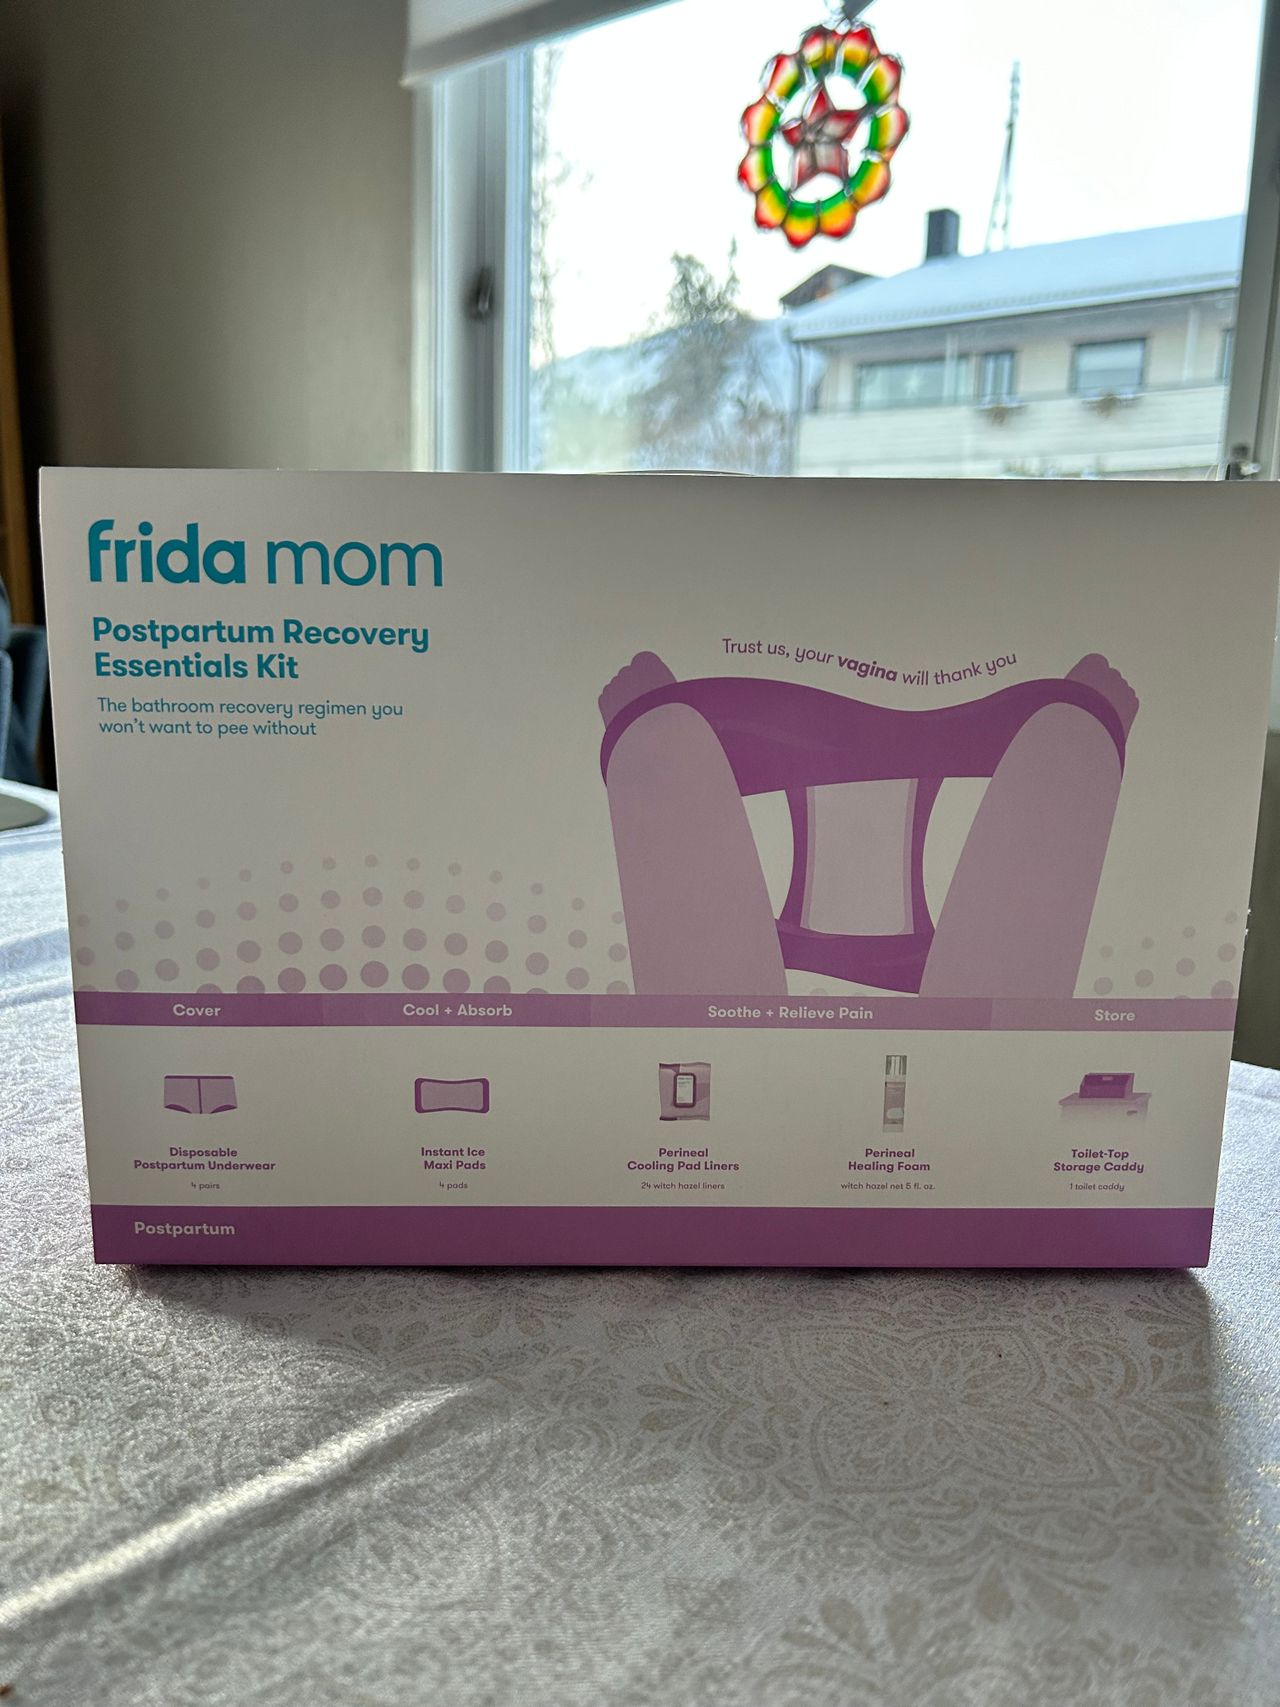 Frida Mom Postpartum Recovery Essentials Kit  Disposable Underwear, Ice  Maxi Absorbency Pads, Cooling Witch Hazel Medicated Pad Liners, Perineal  Medicated Healing Foam (11 PIECE SET) : : Salud y Cuidado  Personal